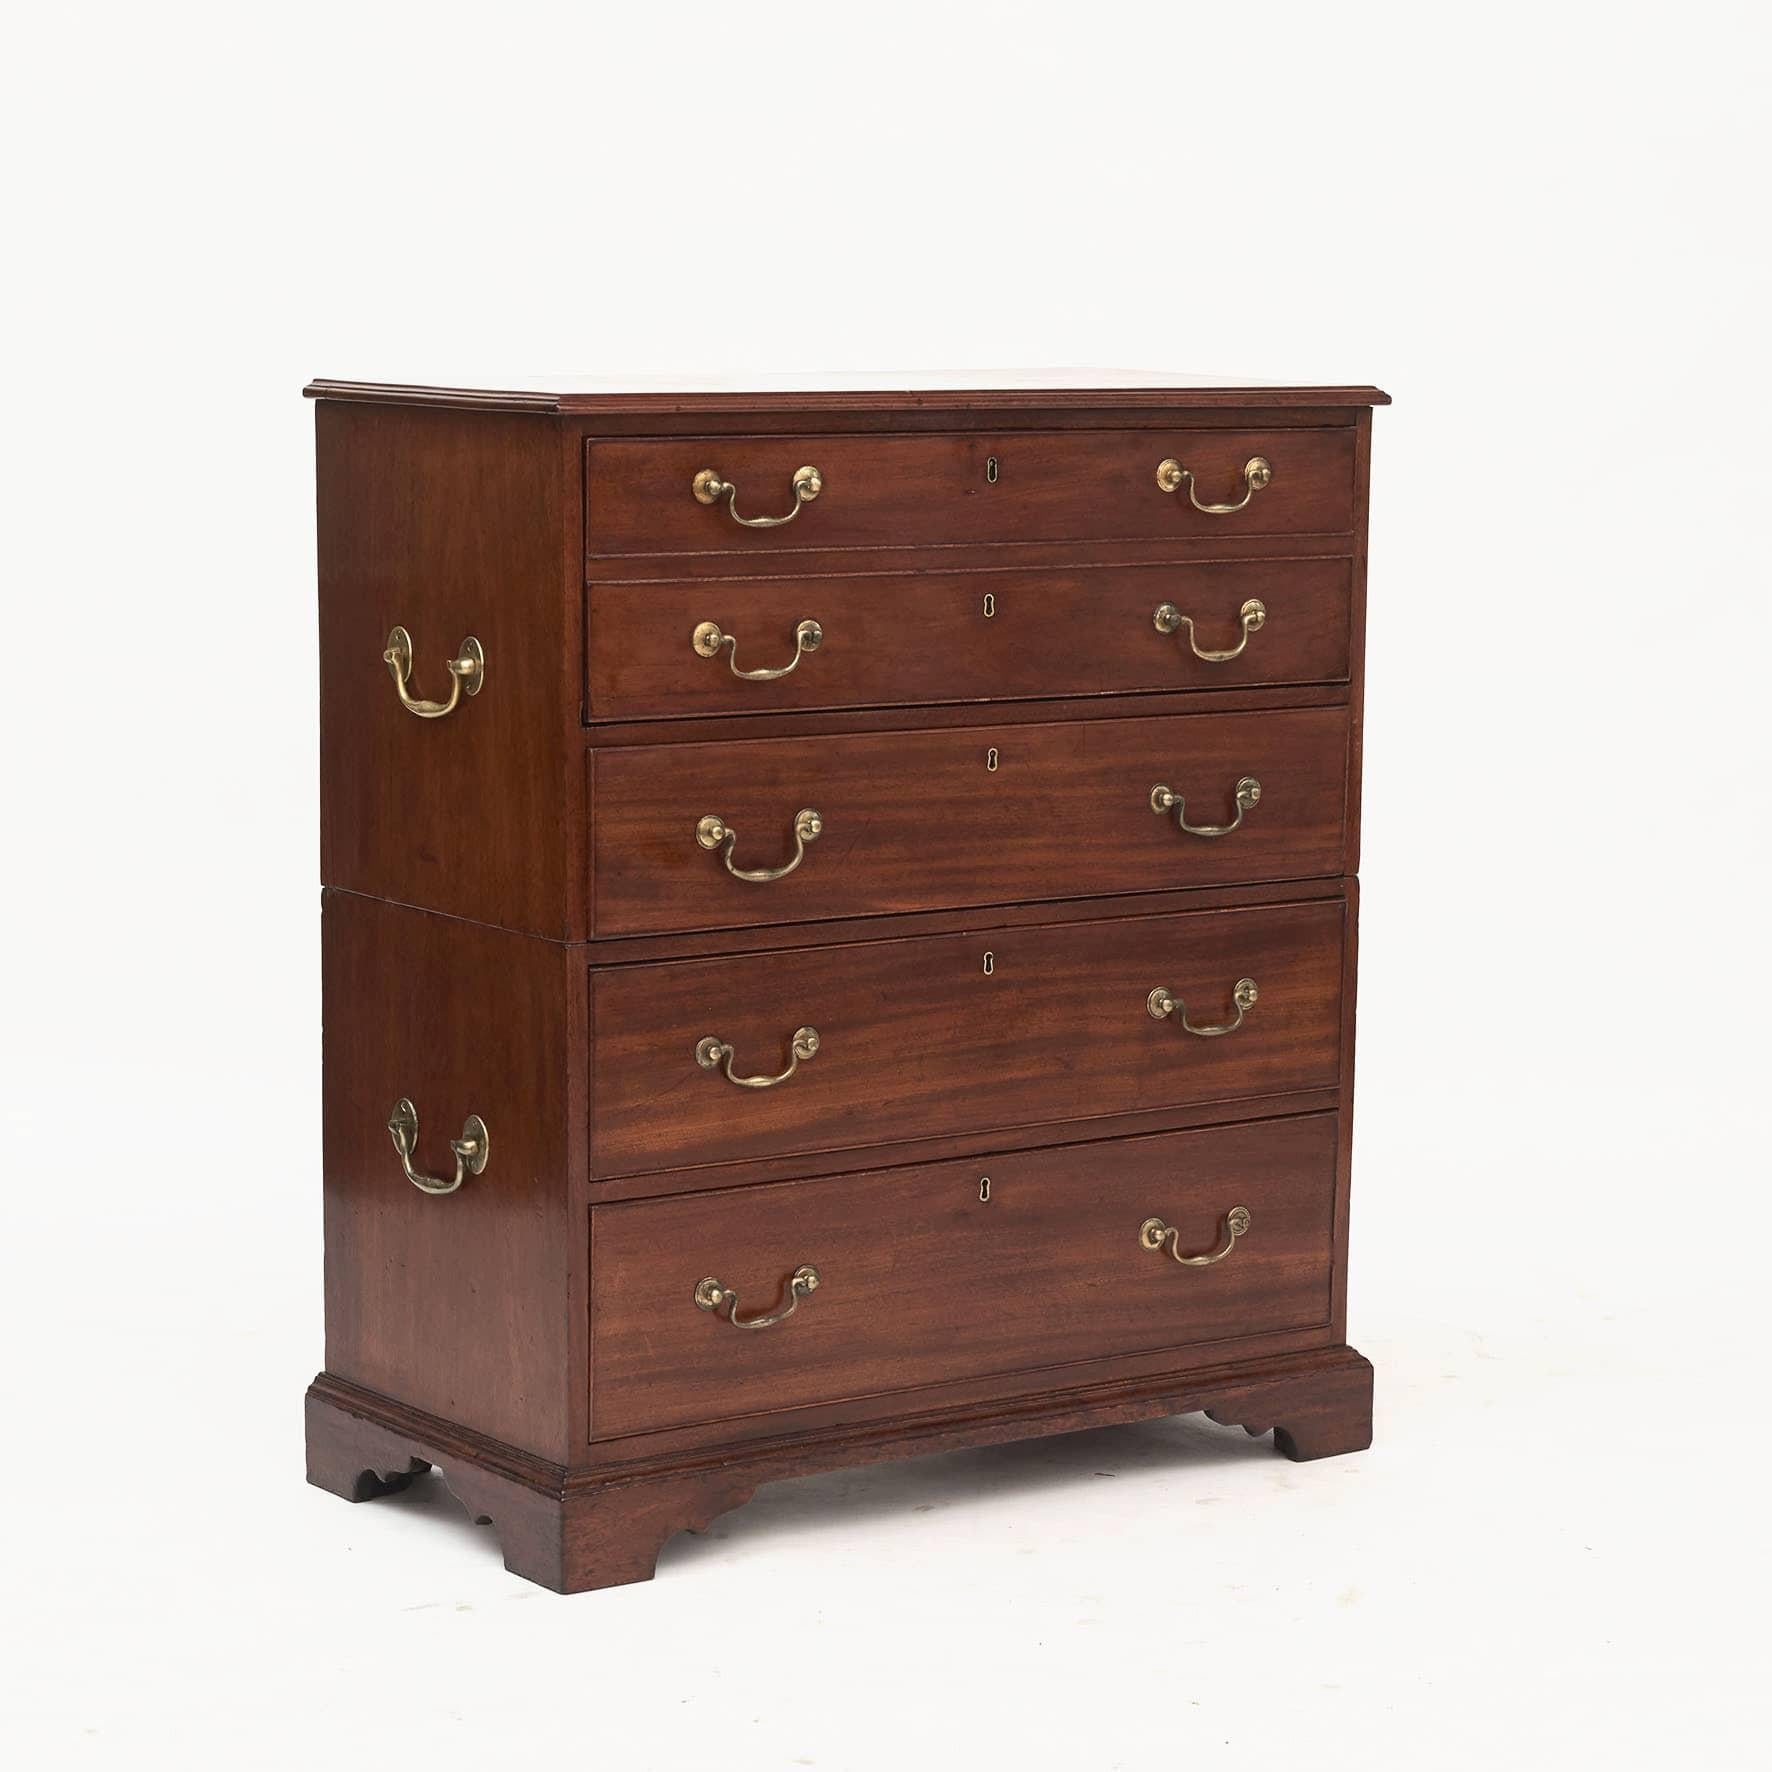 George III Military Chest in 2 parts with writing decor.
Made of solid mahogany with carry handles on both sides.
5 drawers of which the two top drawers are faux drawers containing a writing plate and numerous small drawers and